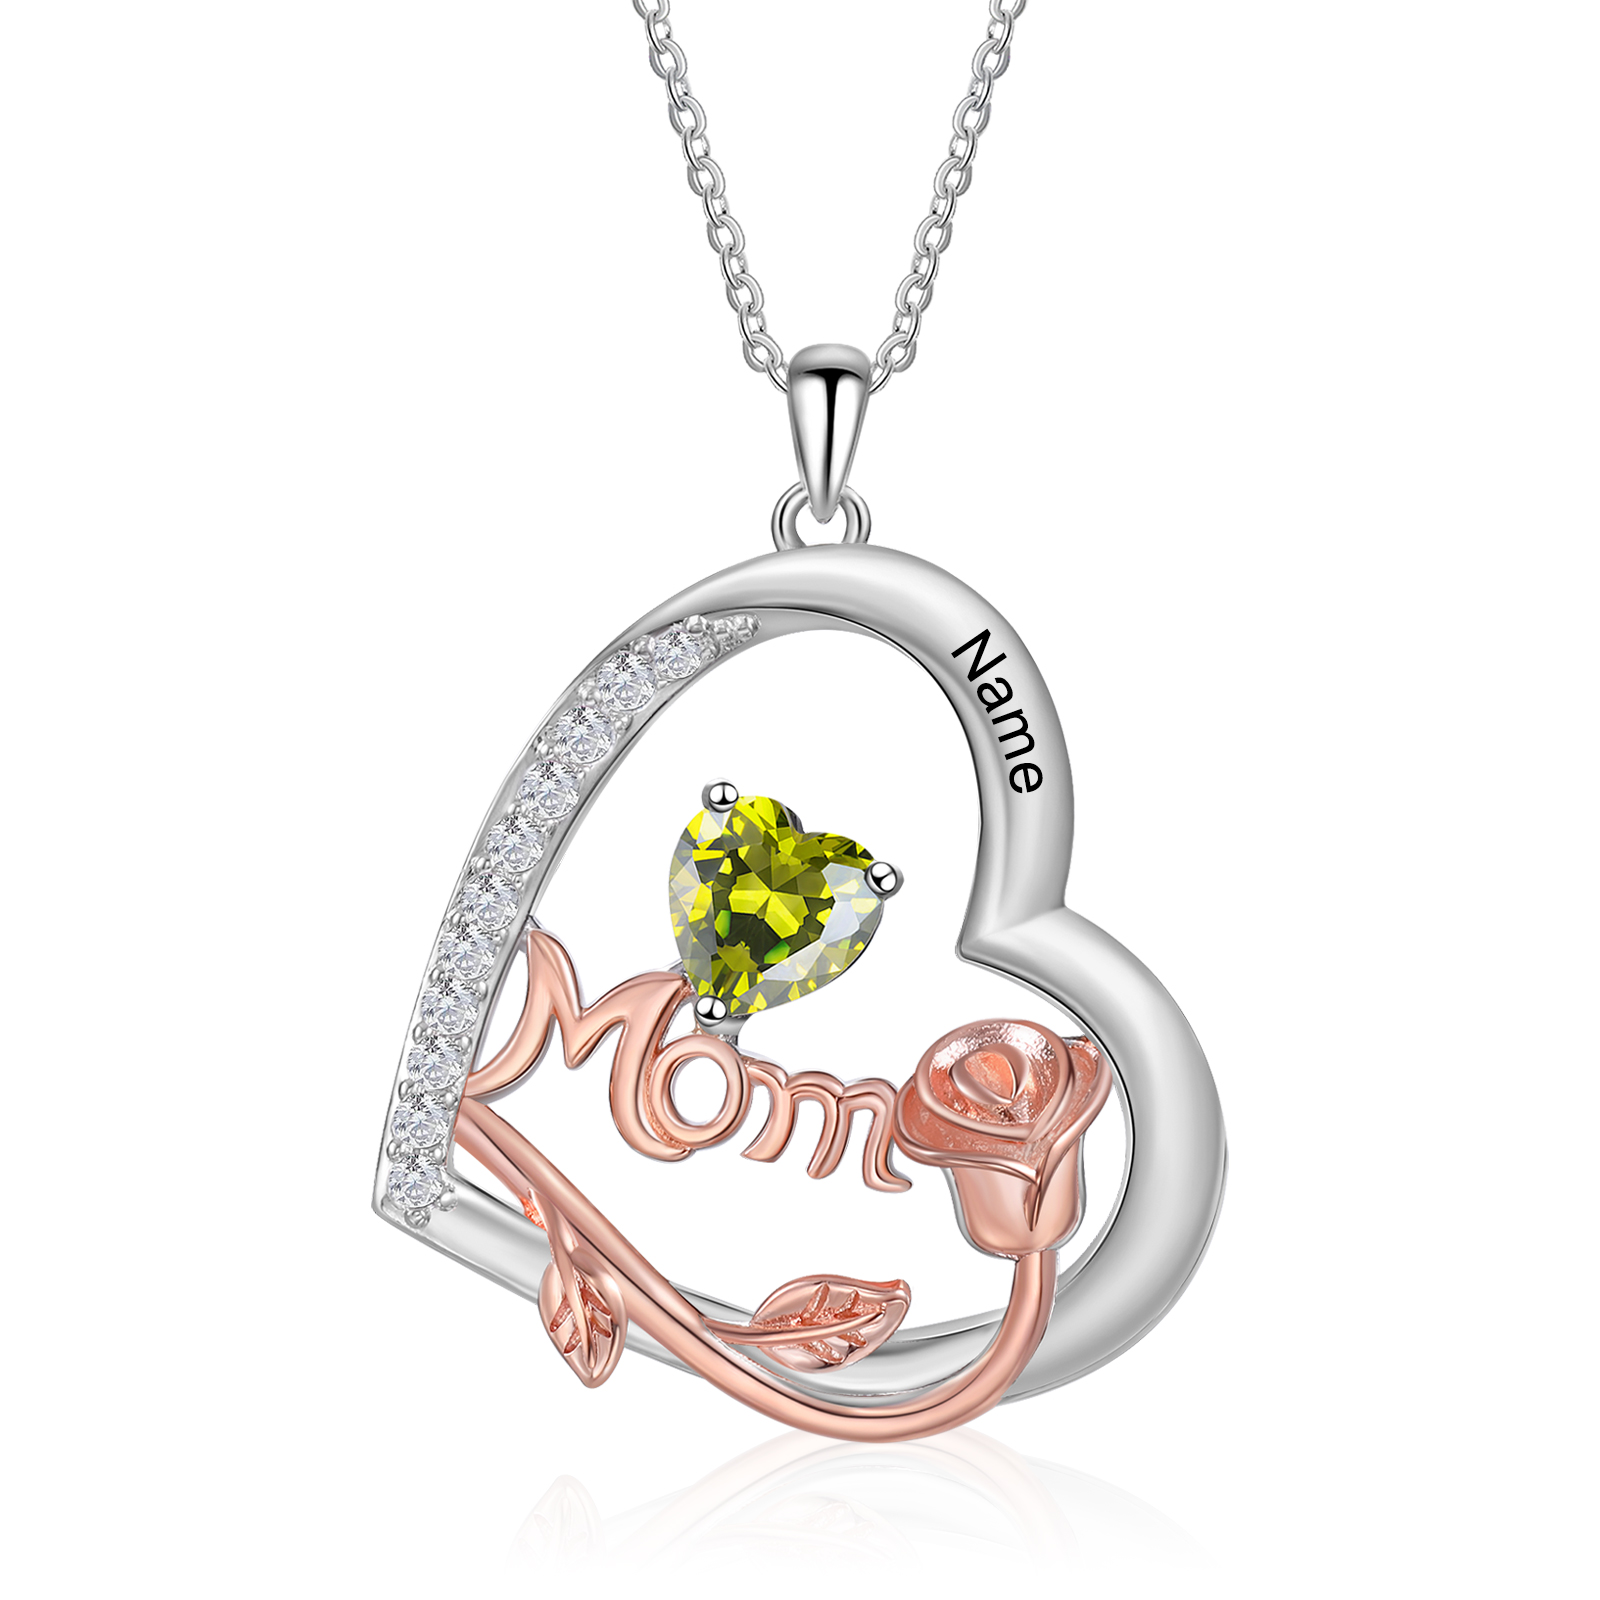 Name - Personalized Silver Heart Necklace with Birthstone and Name as a Mother's Day Gift for Mom